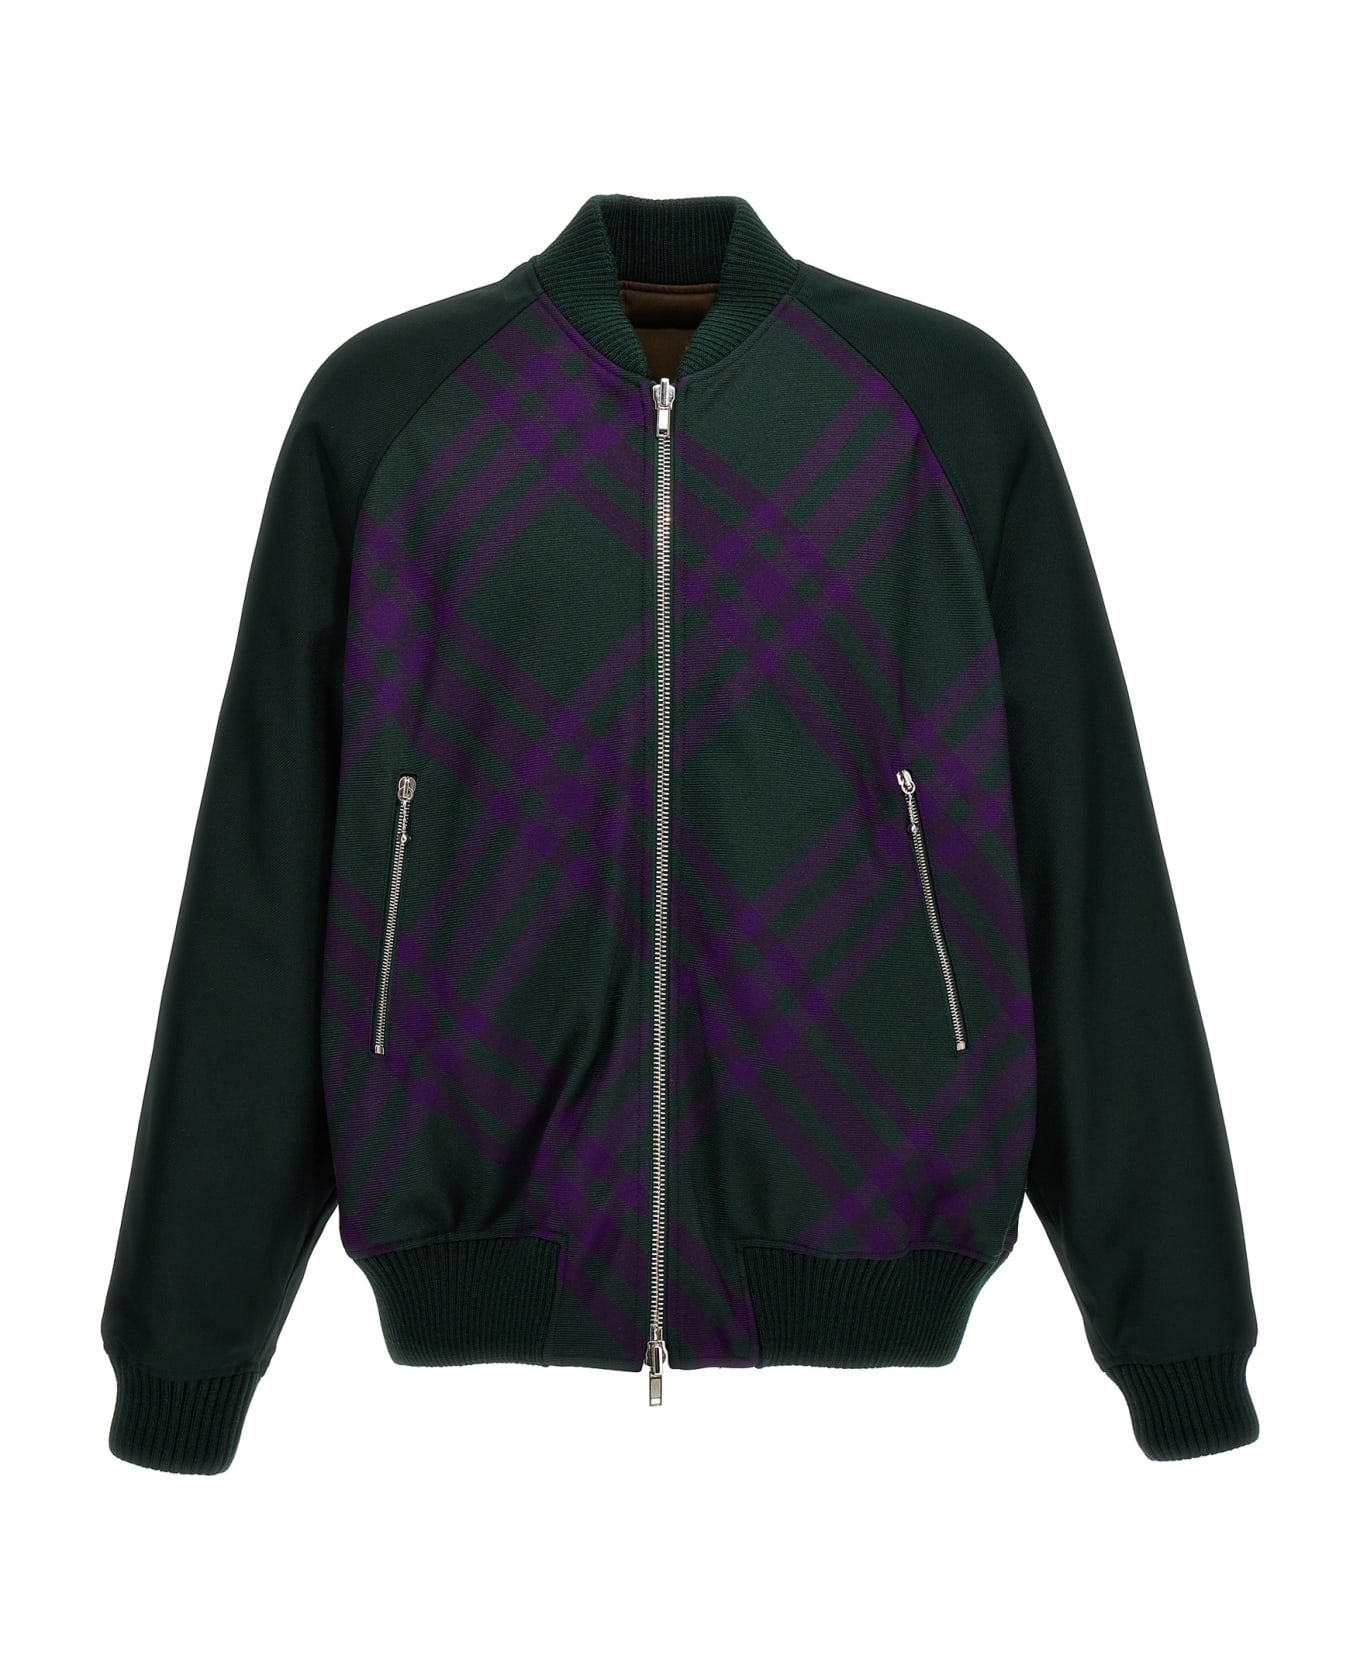 Burberry Check Reversible Bomber Jacket - Multicolor